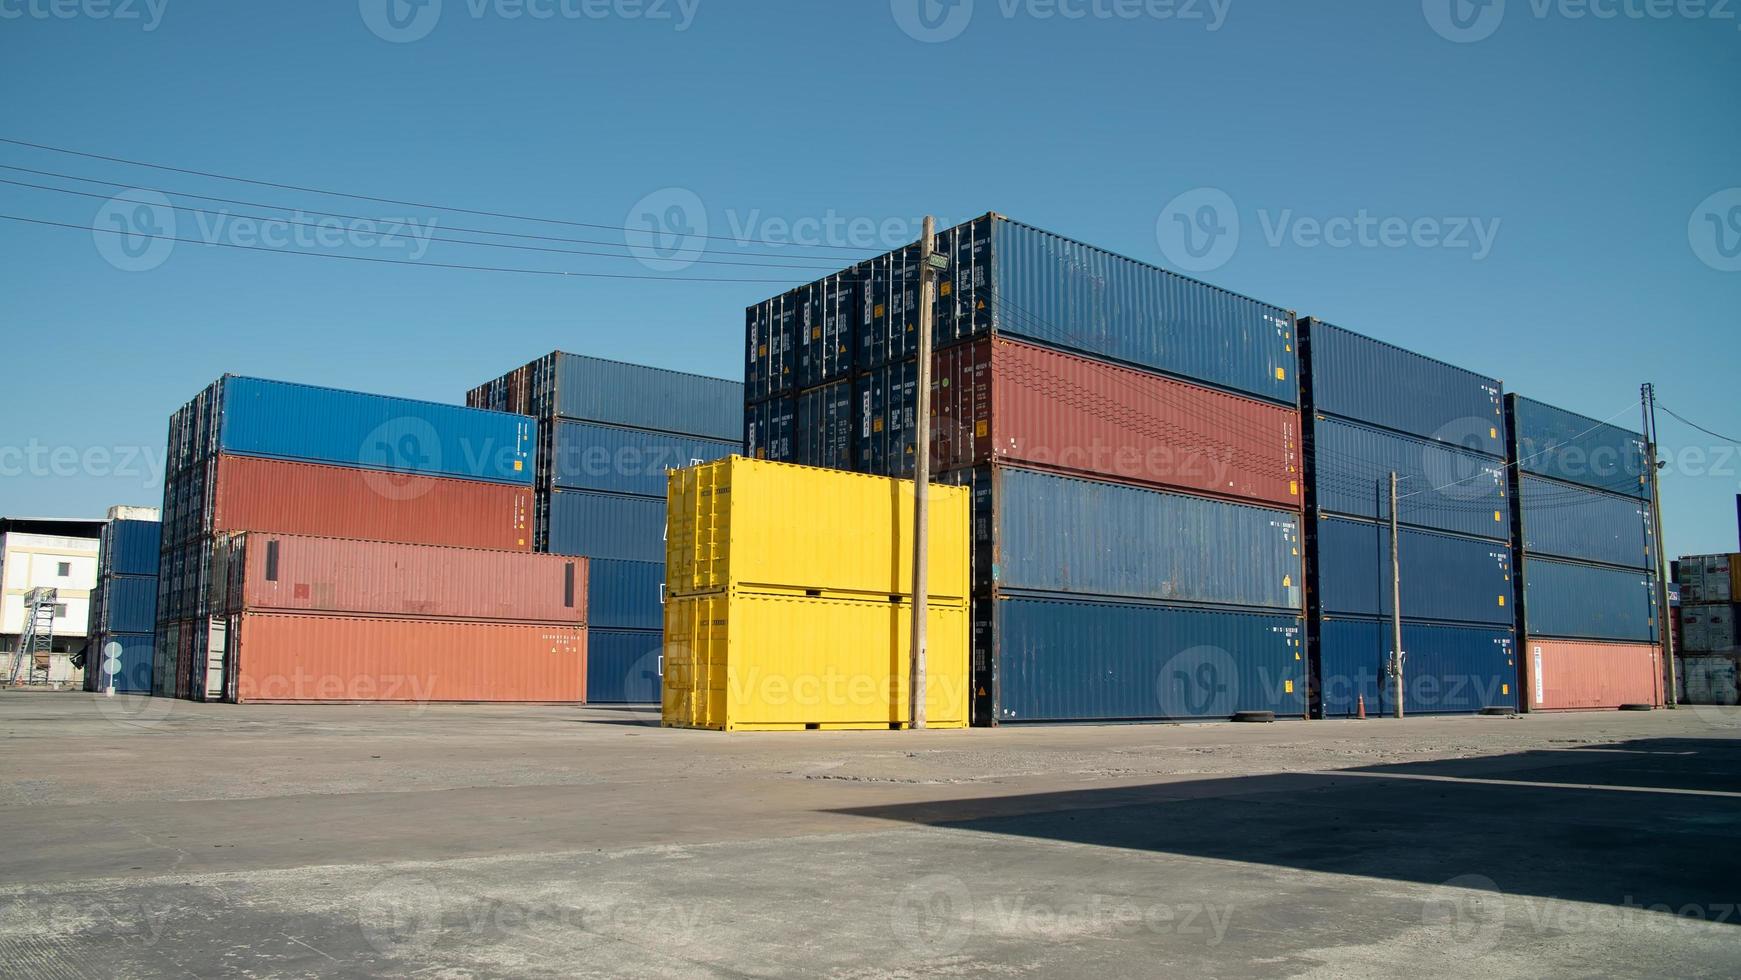 Container Cargo Port Ship Yard Storage Handling of Logistic Transportation Industry. Row of Stacking Containers of Freight Import Export Distribution Warehouse. Shipping Logistics Transport Industrial photo